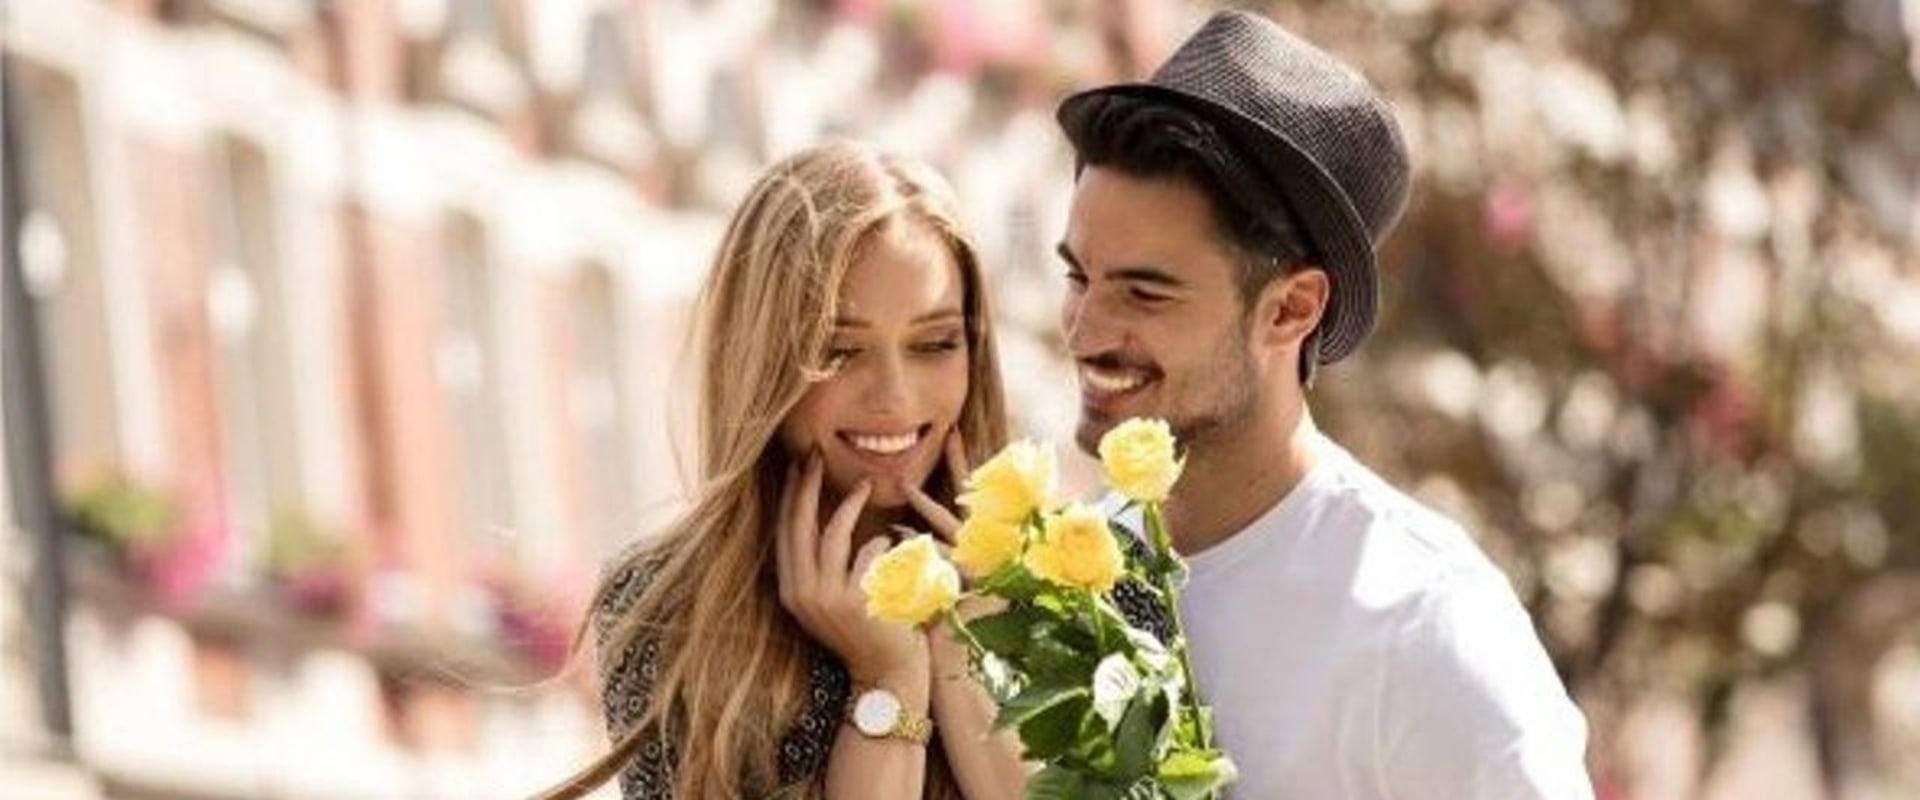 Creating a Romantic Atmosphere: A Guide for First Dates